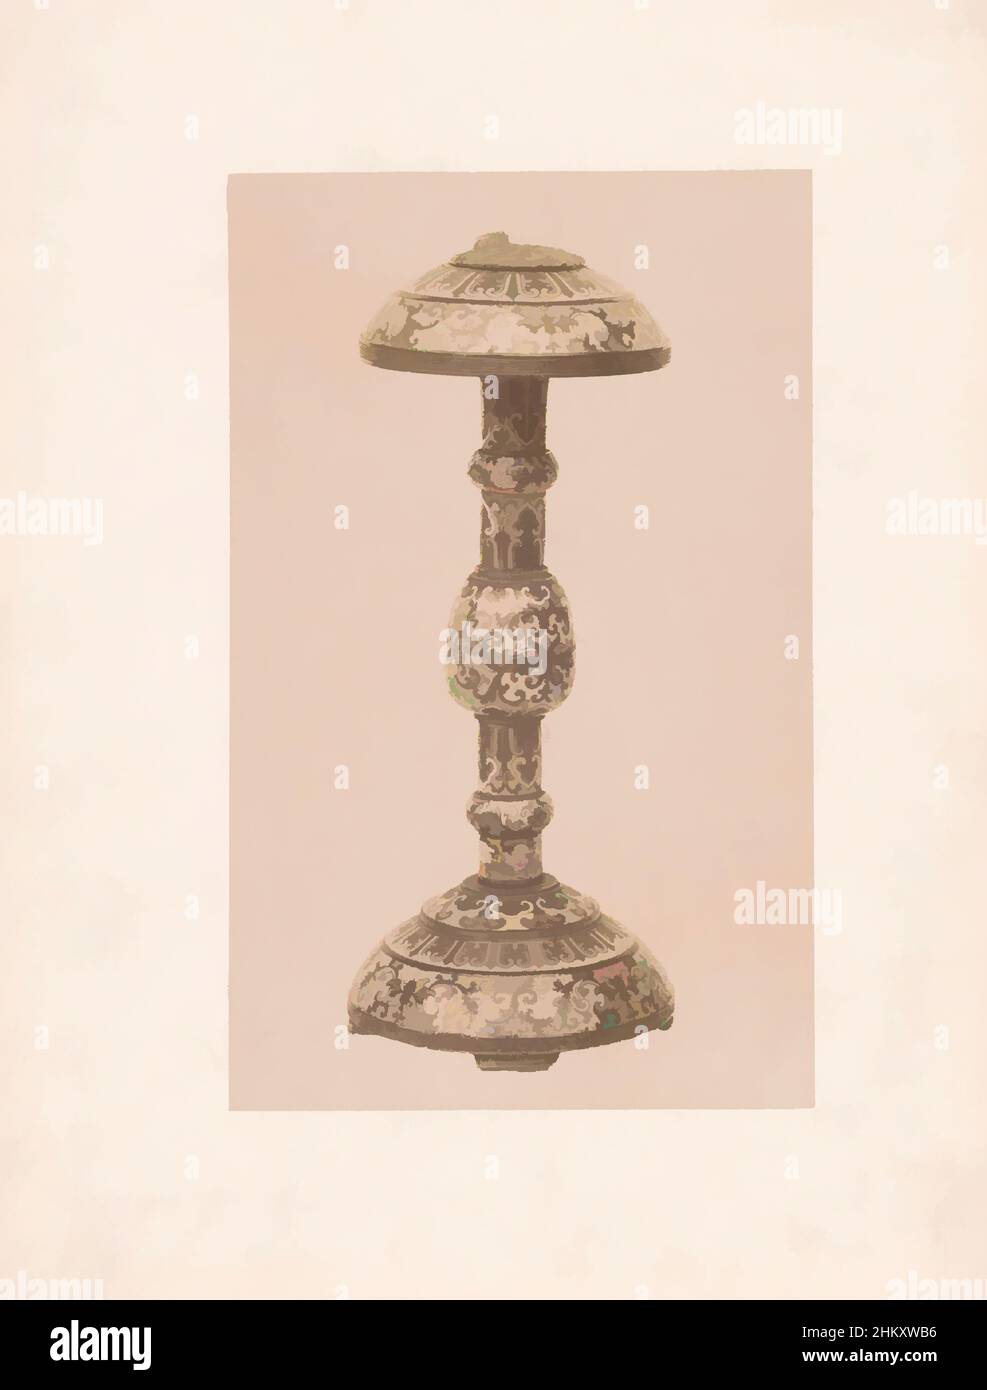 Art inspired by Object on a base decorated with plant motifs, possibly an ashtray or candlestick, c. 1875 - c. 1900, cardboard, albumen print, height 209 mm × width 131 mm, Classic works modernized by Artotop with a splash of modernity. Shapes, color and value, eye-catching visual impact on art. Emotions through freedom of artworks in a contemporary way. A timeless message pursuing a wildly creative new direction. Artists turning to the digital medium and creating the Artotop NFT Stock Photo